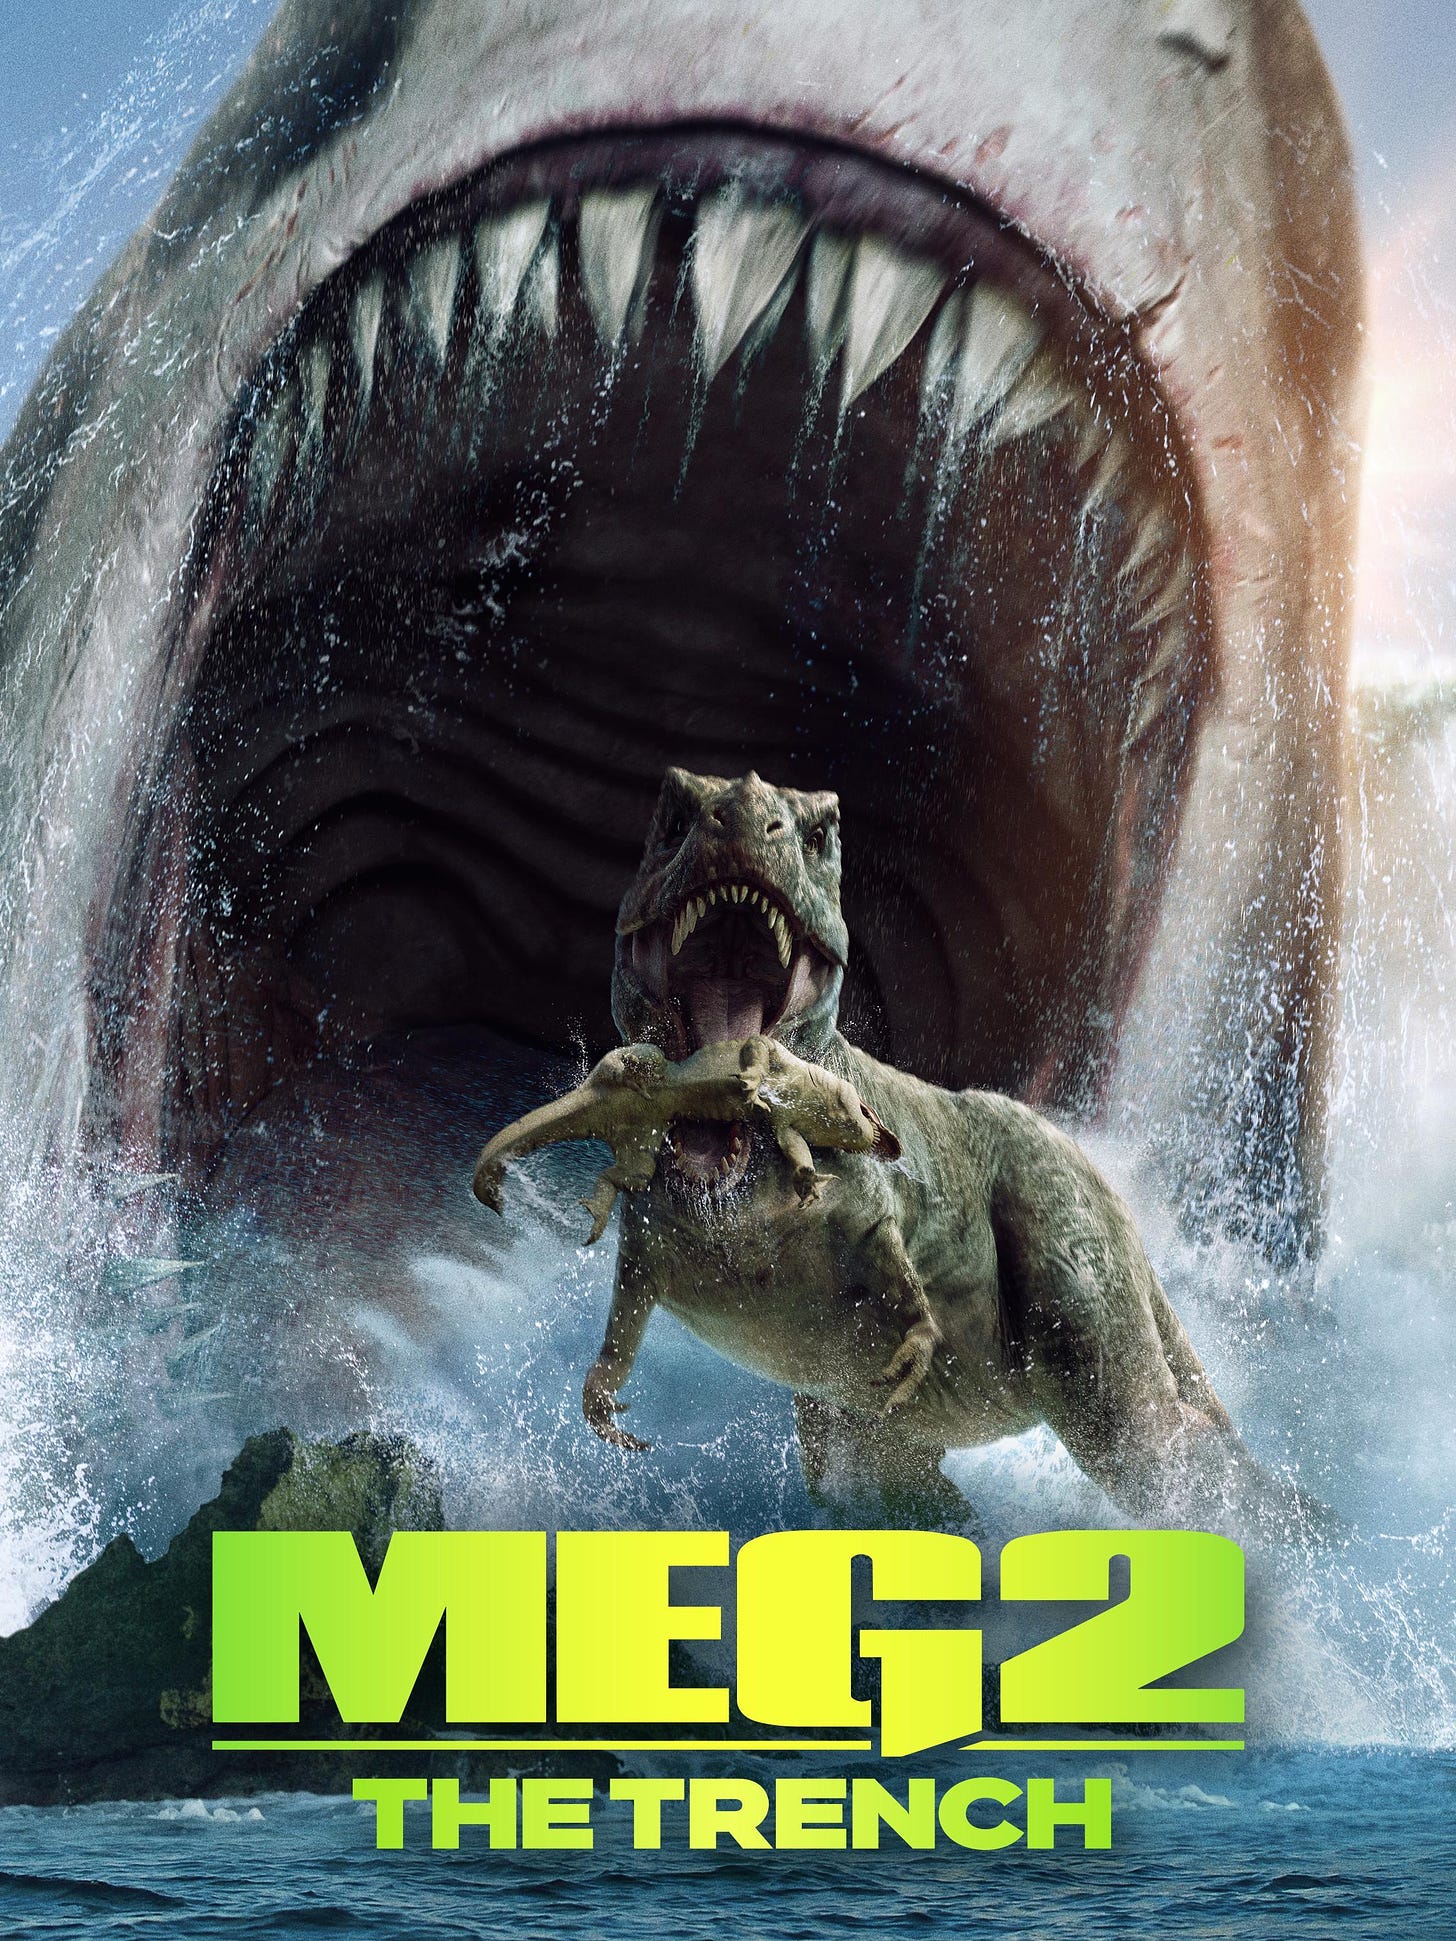 Image of movie poster for Meg 2: The Trench with a giant shark about to eat a T-Rex.